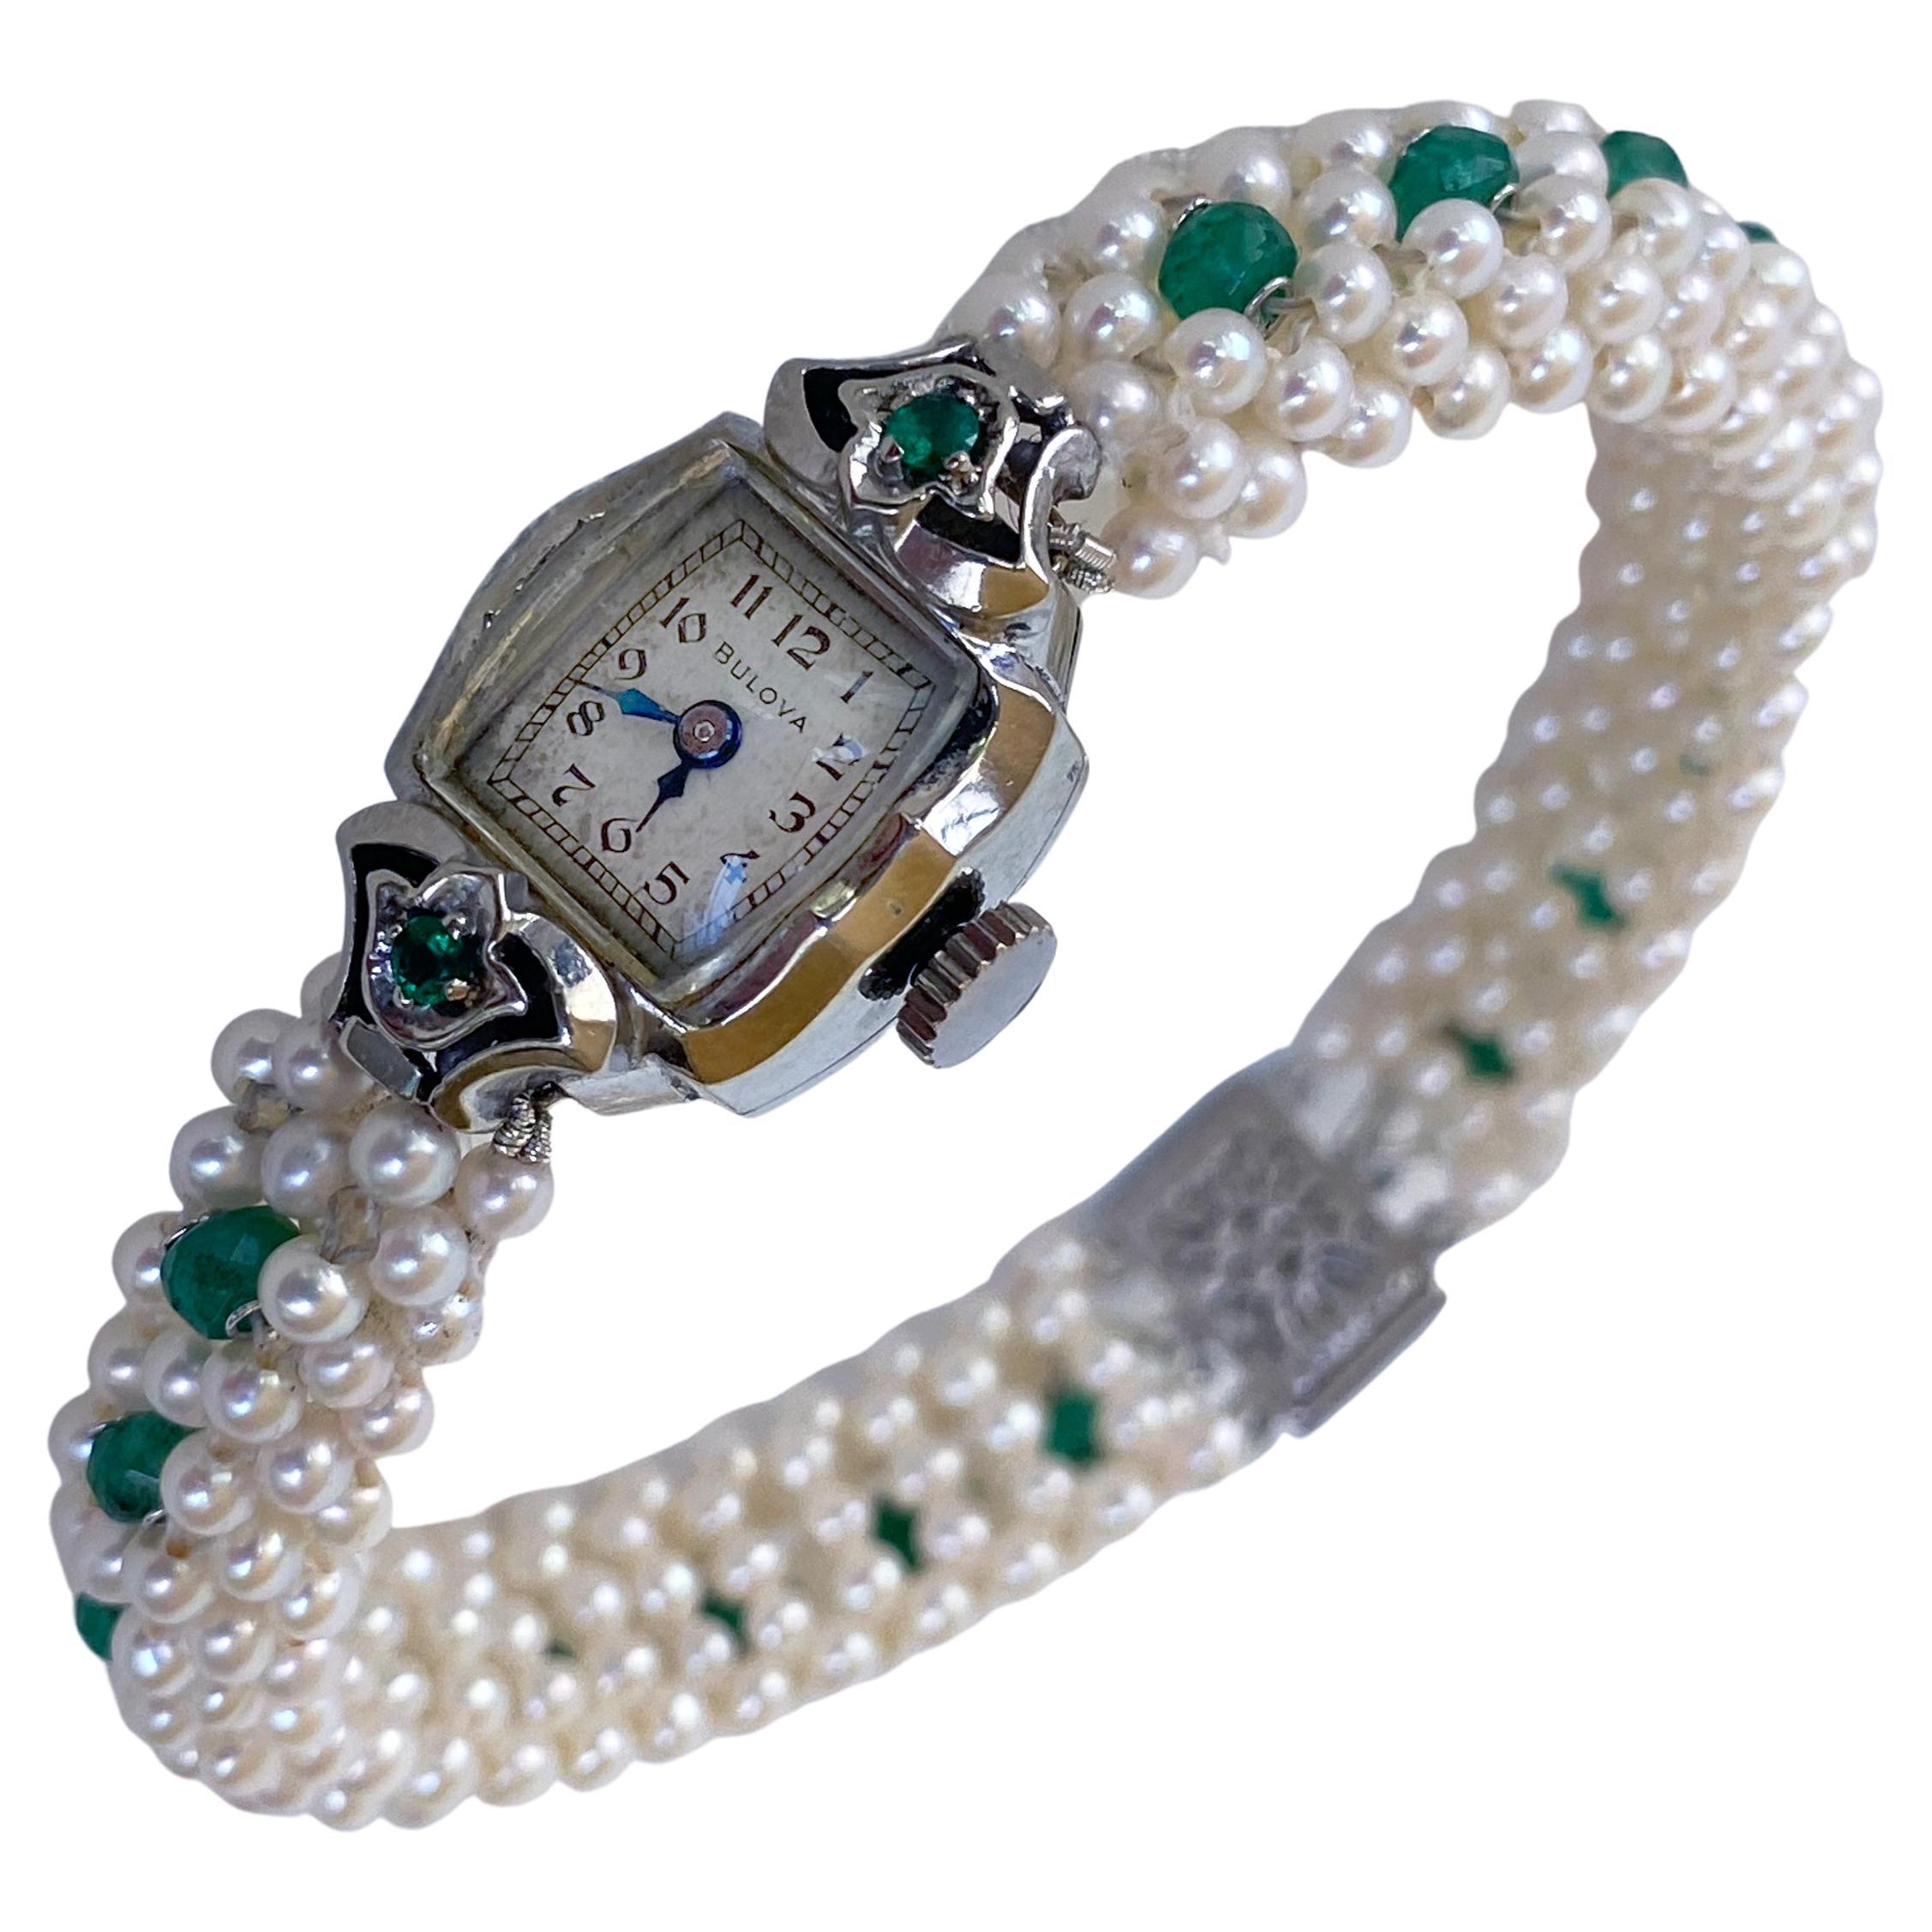 Marina J. Emerald Encrusted Vintage Watch with Pearls and 14k White Gold For Sale